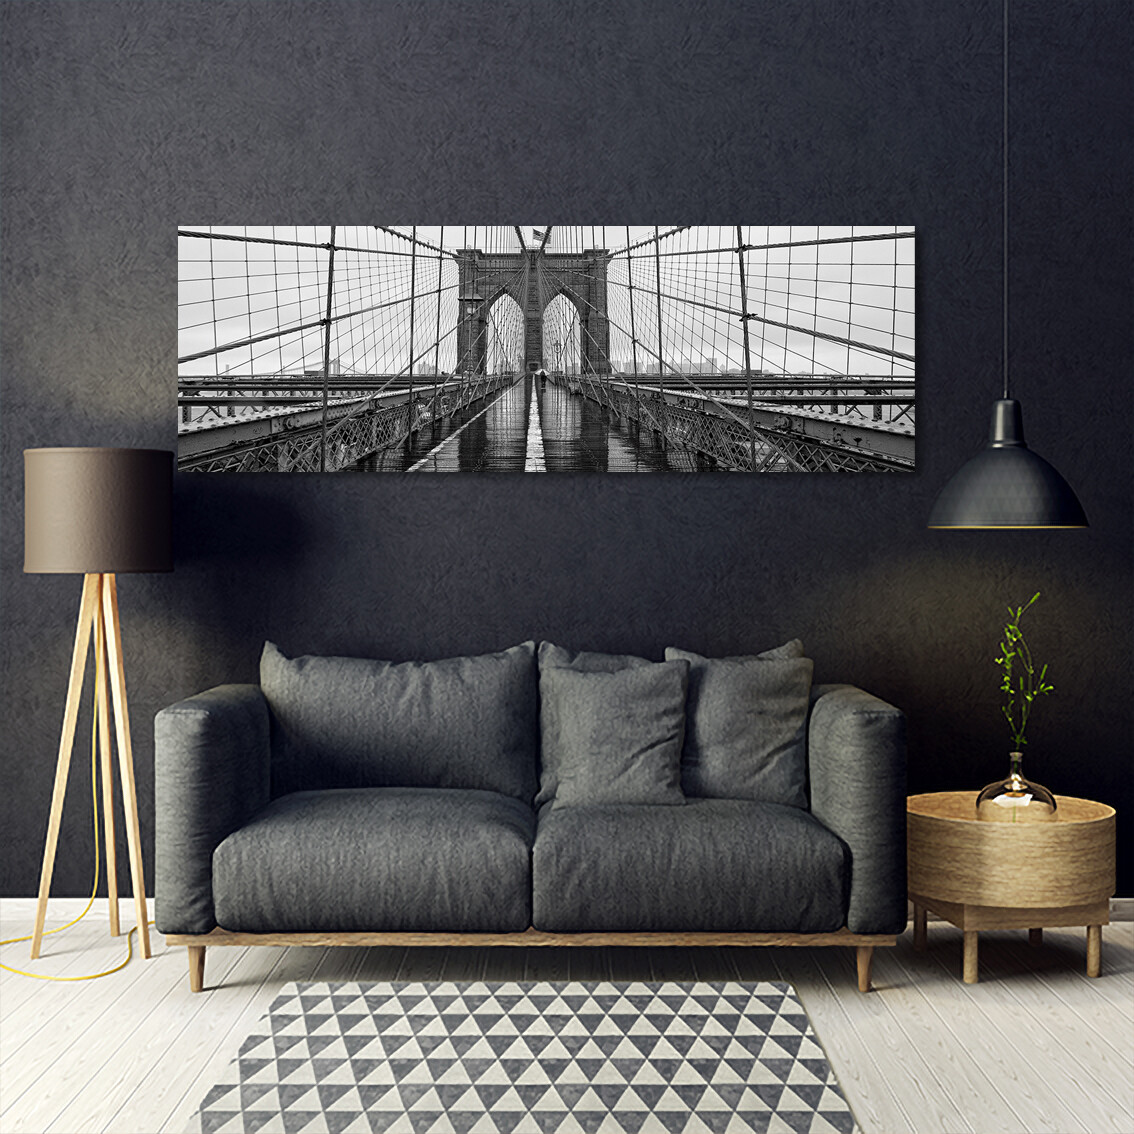 Brooklyn Bridge Black and White - Modern Luxury Wall art Printed on Acrylic Glass - Frameless and Ready to Hang